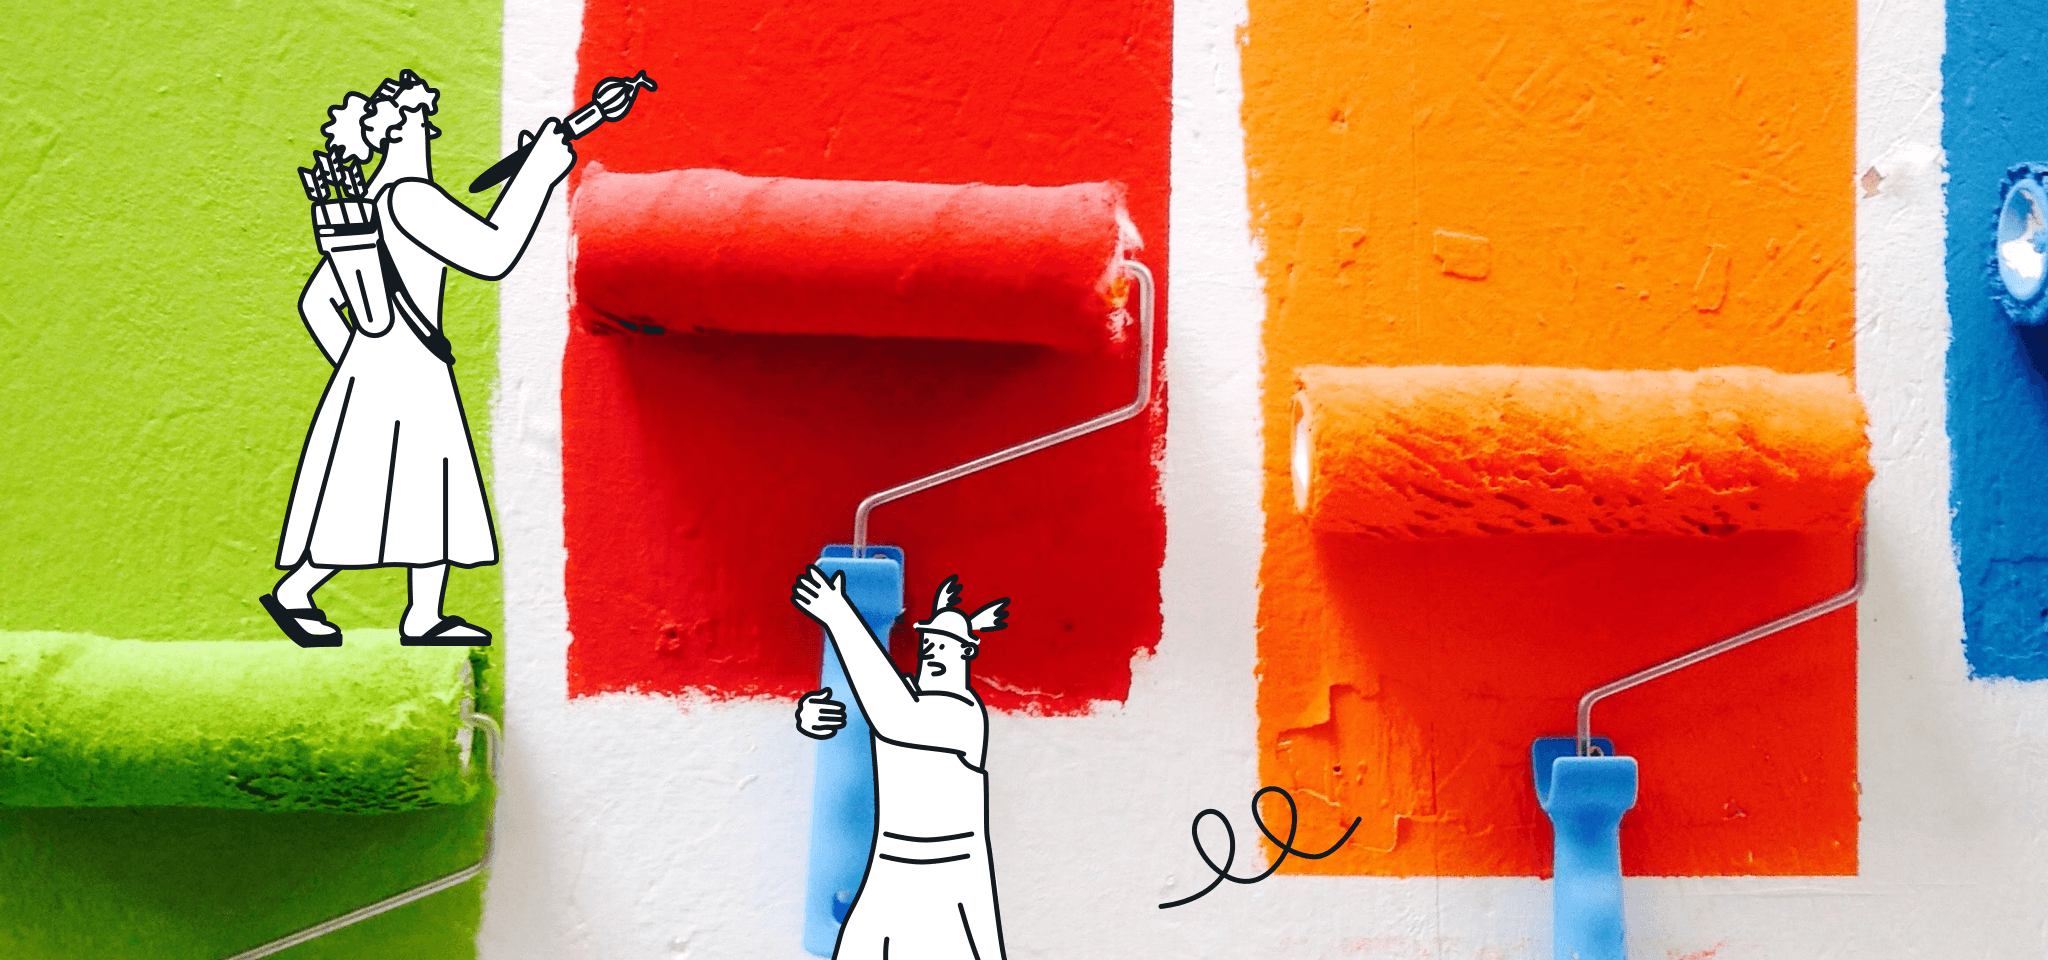 Hermes and a Goddess paint a wall with brushes